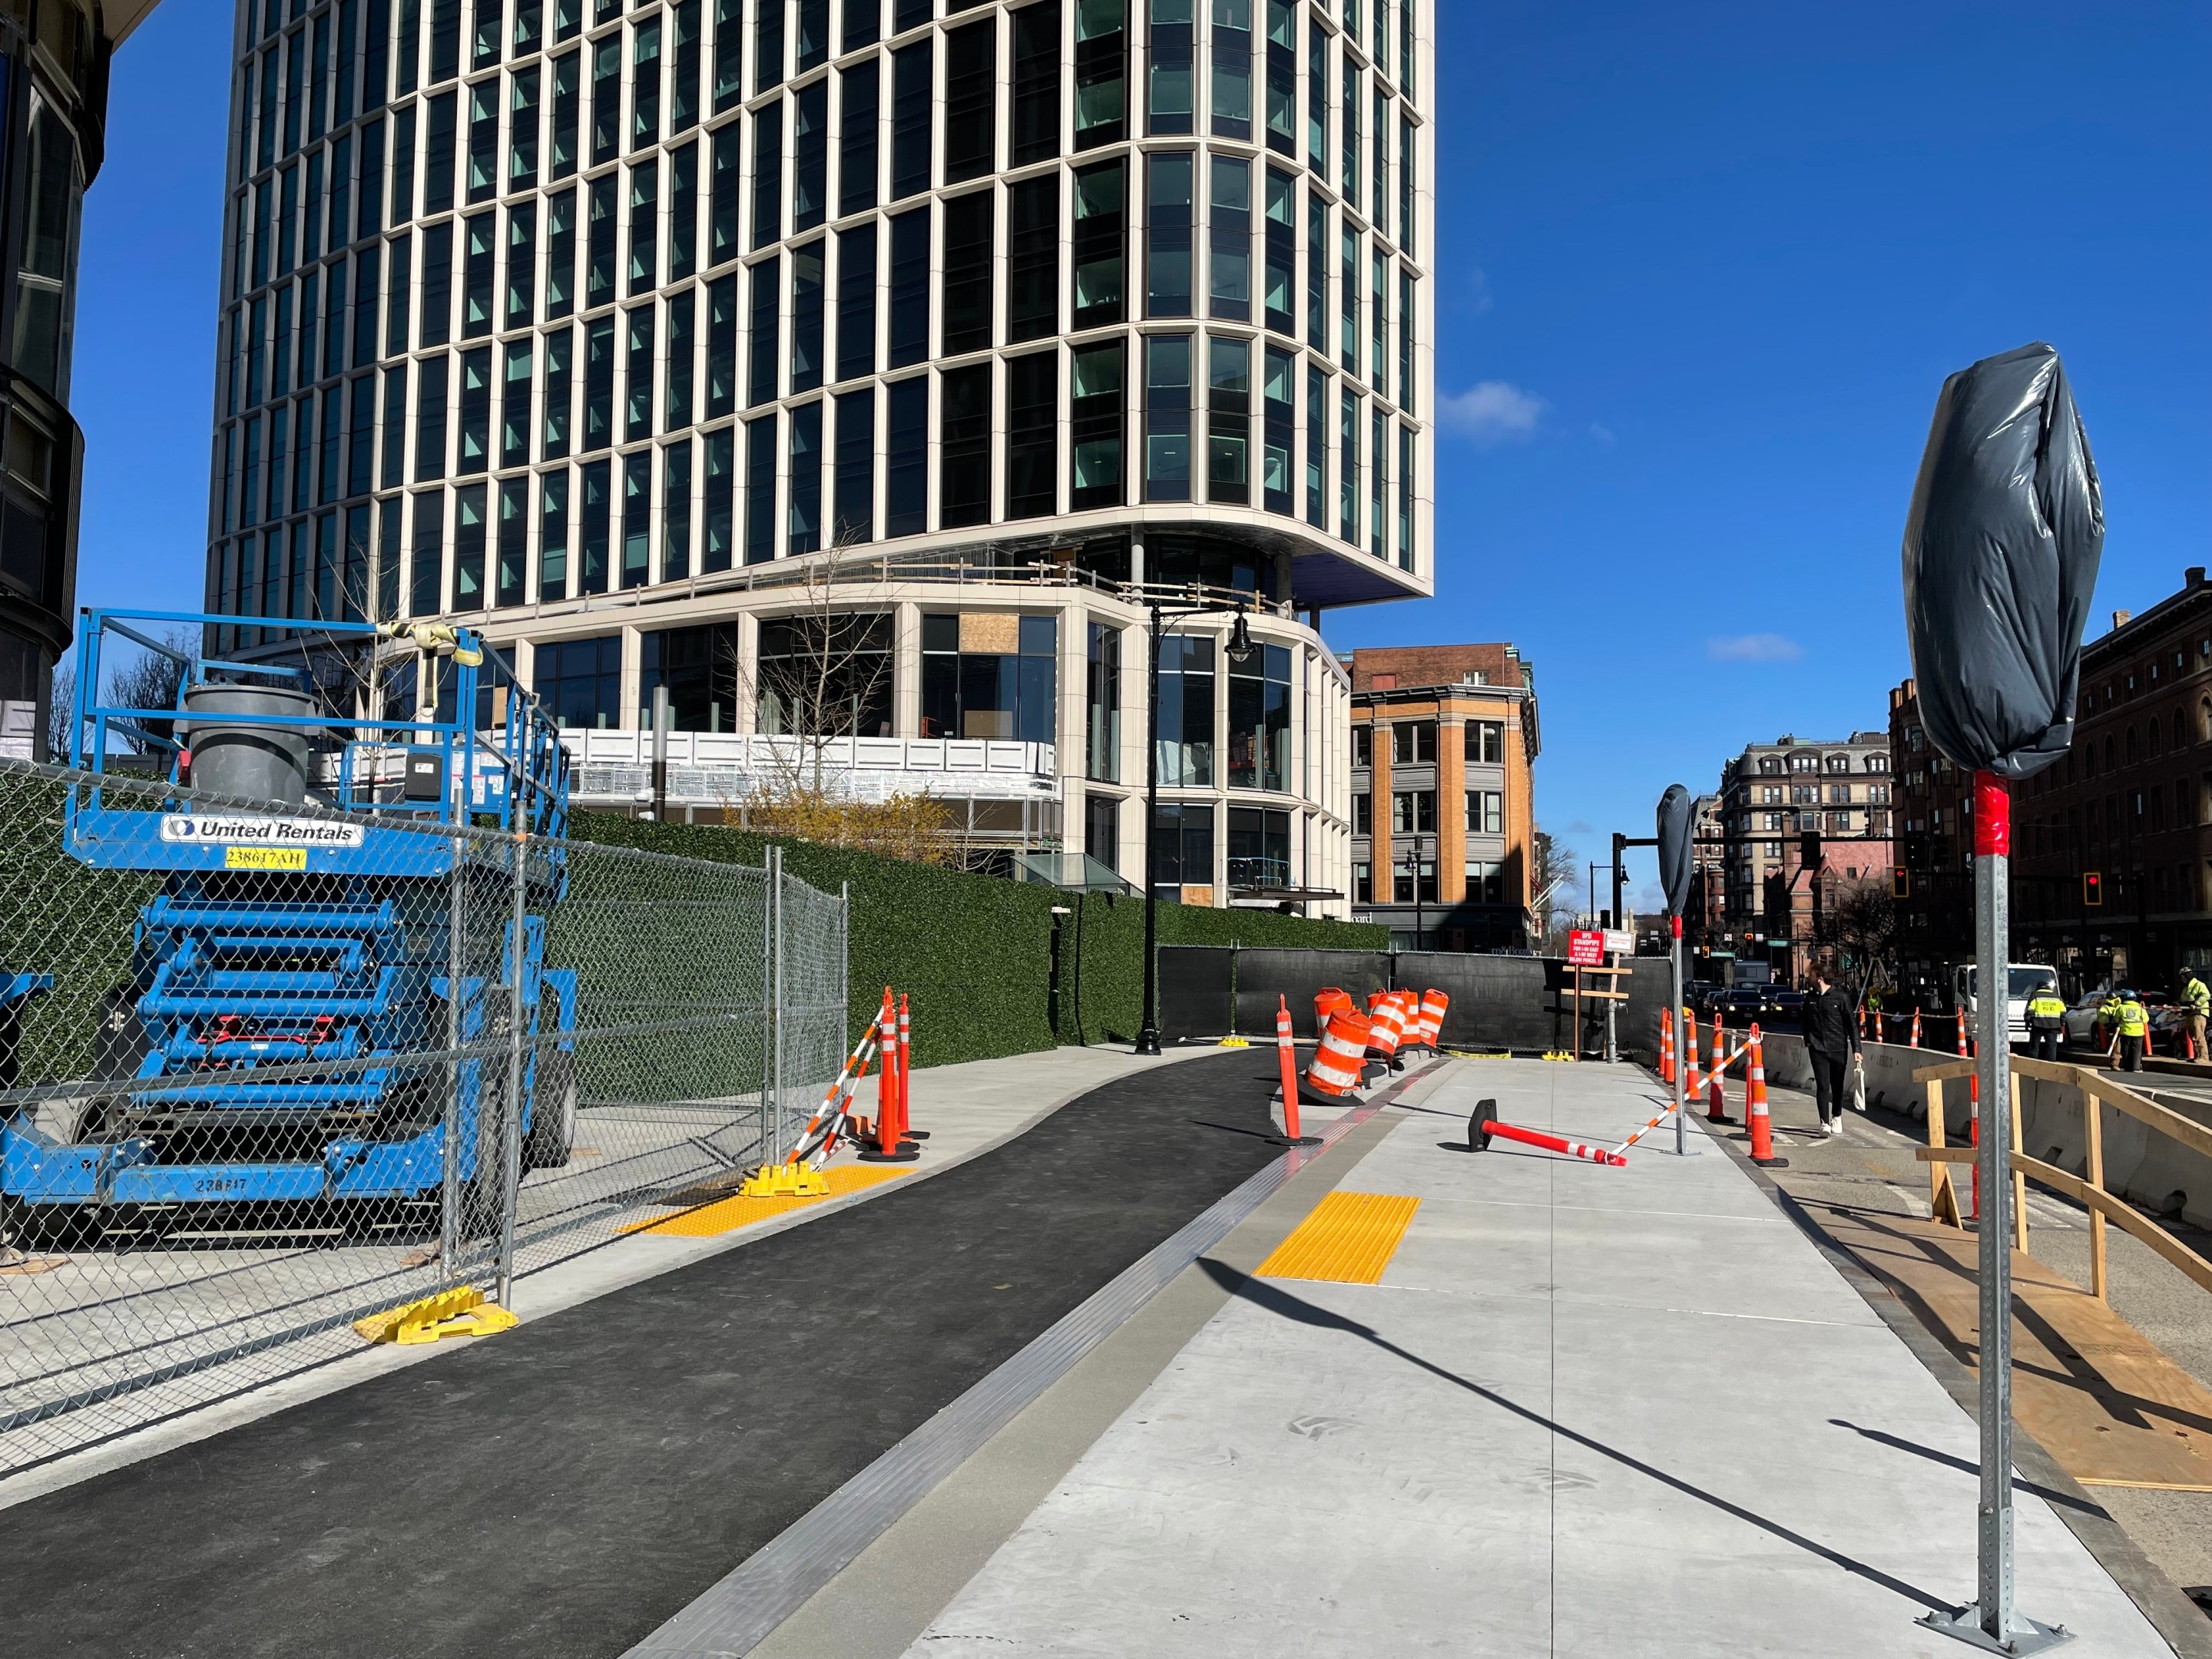 A sidewalk under construction with as asphalt bike path running down the middle. In the distance a new high-rise building rises behind a construction fence.